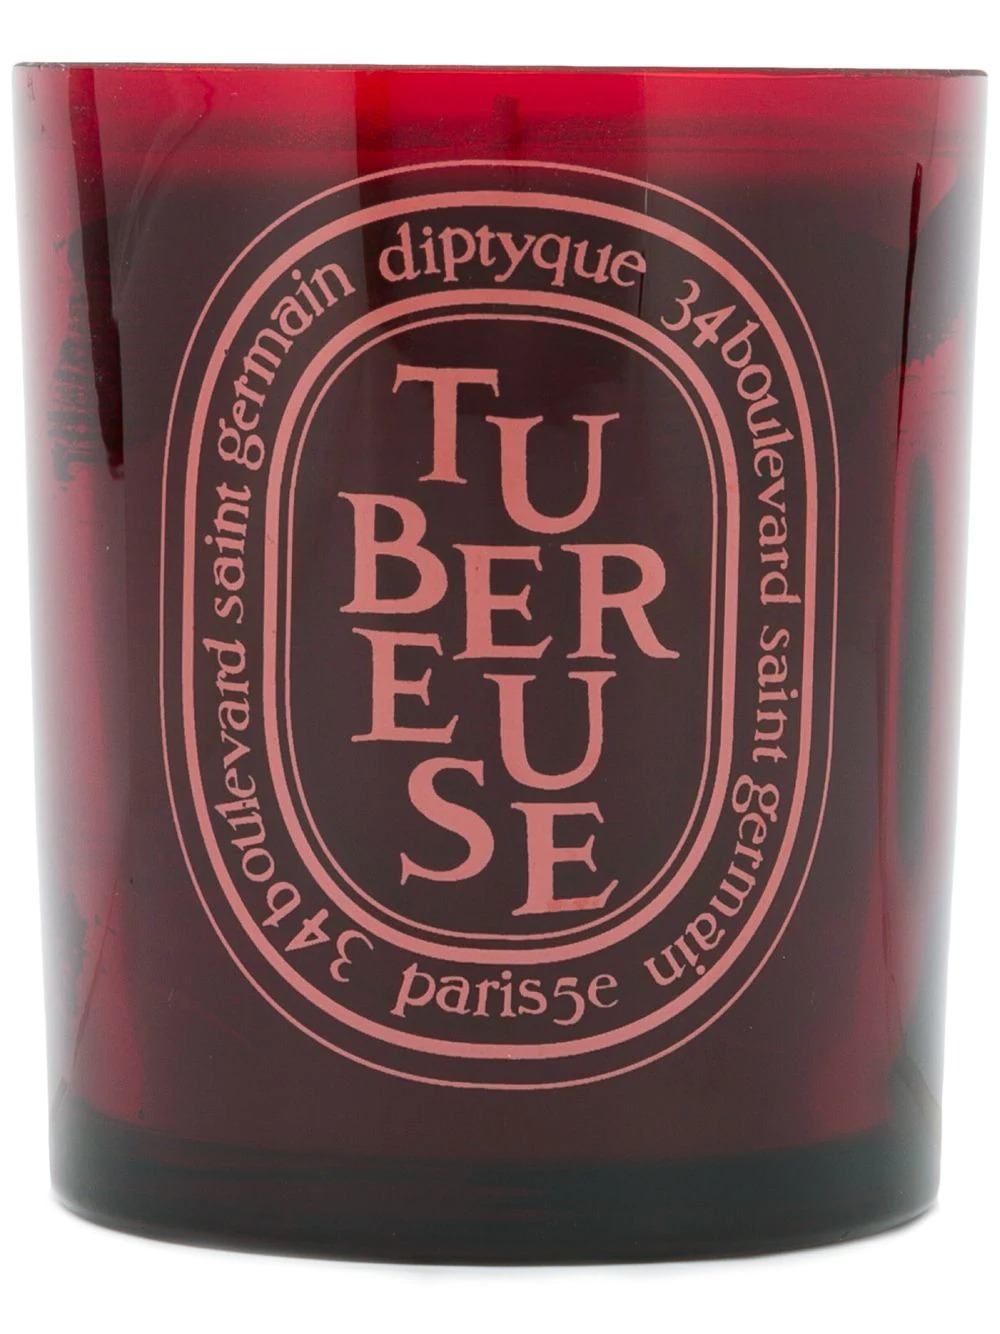 Diptyque Tubereuse candle2